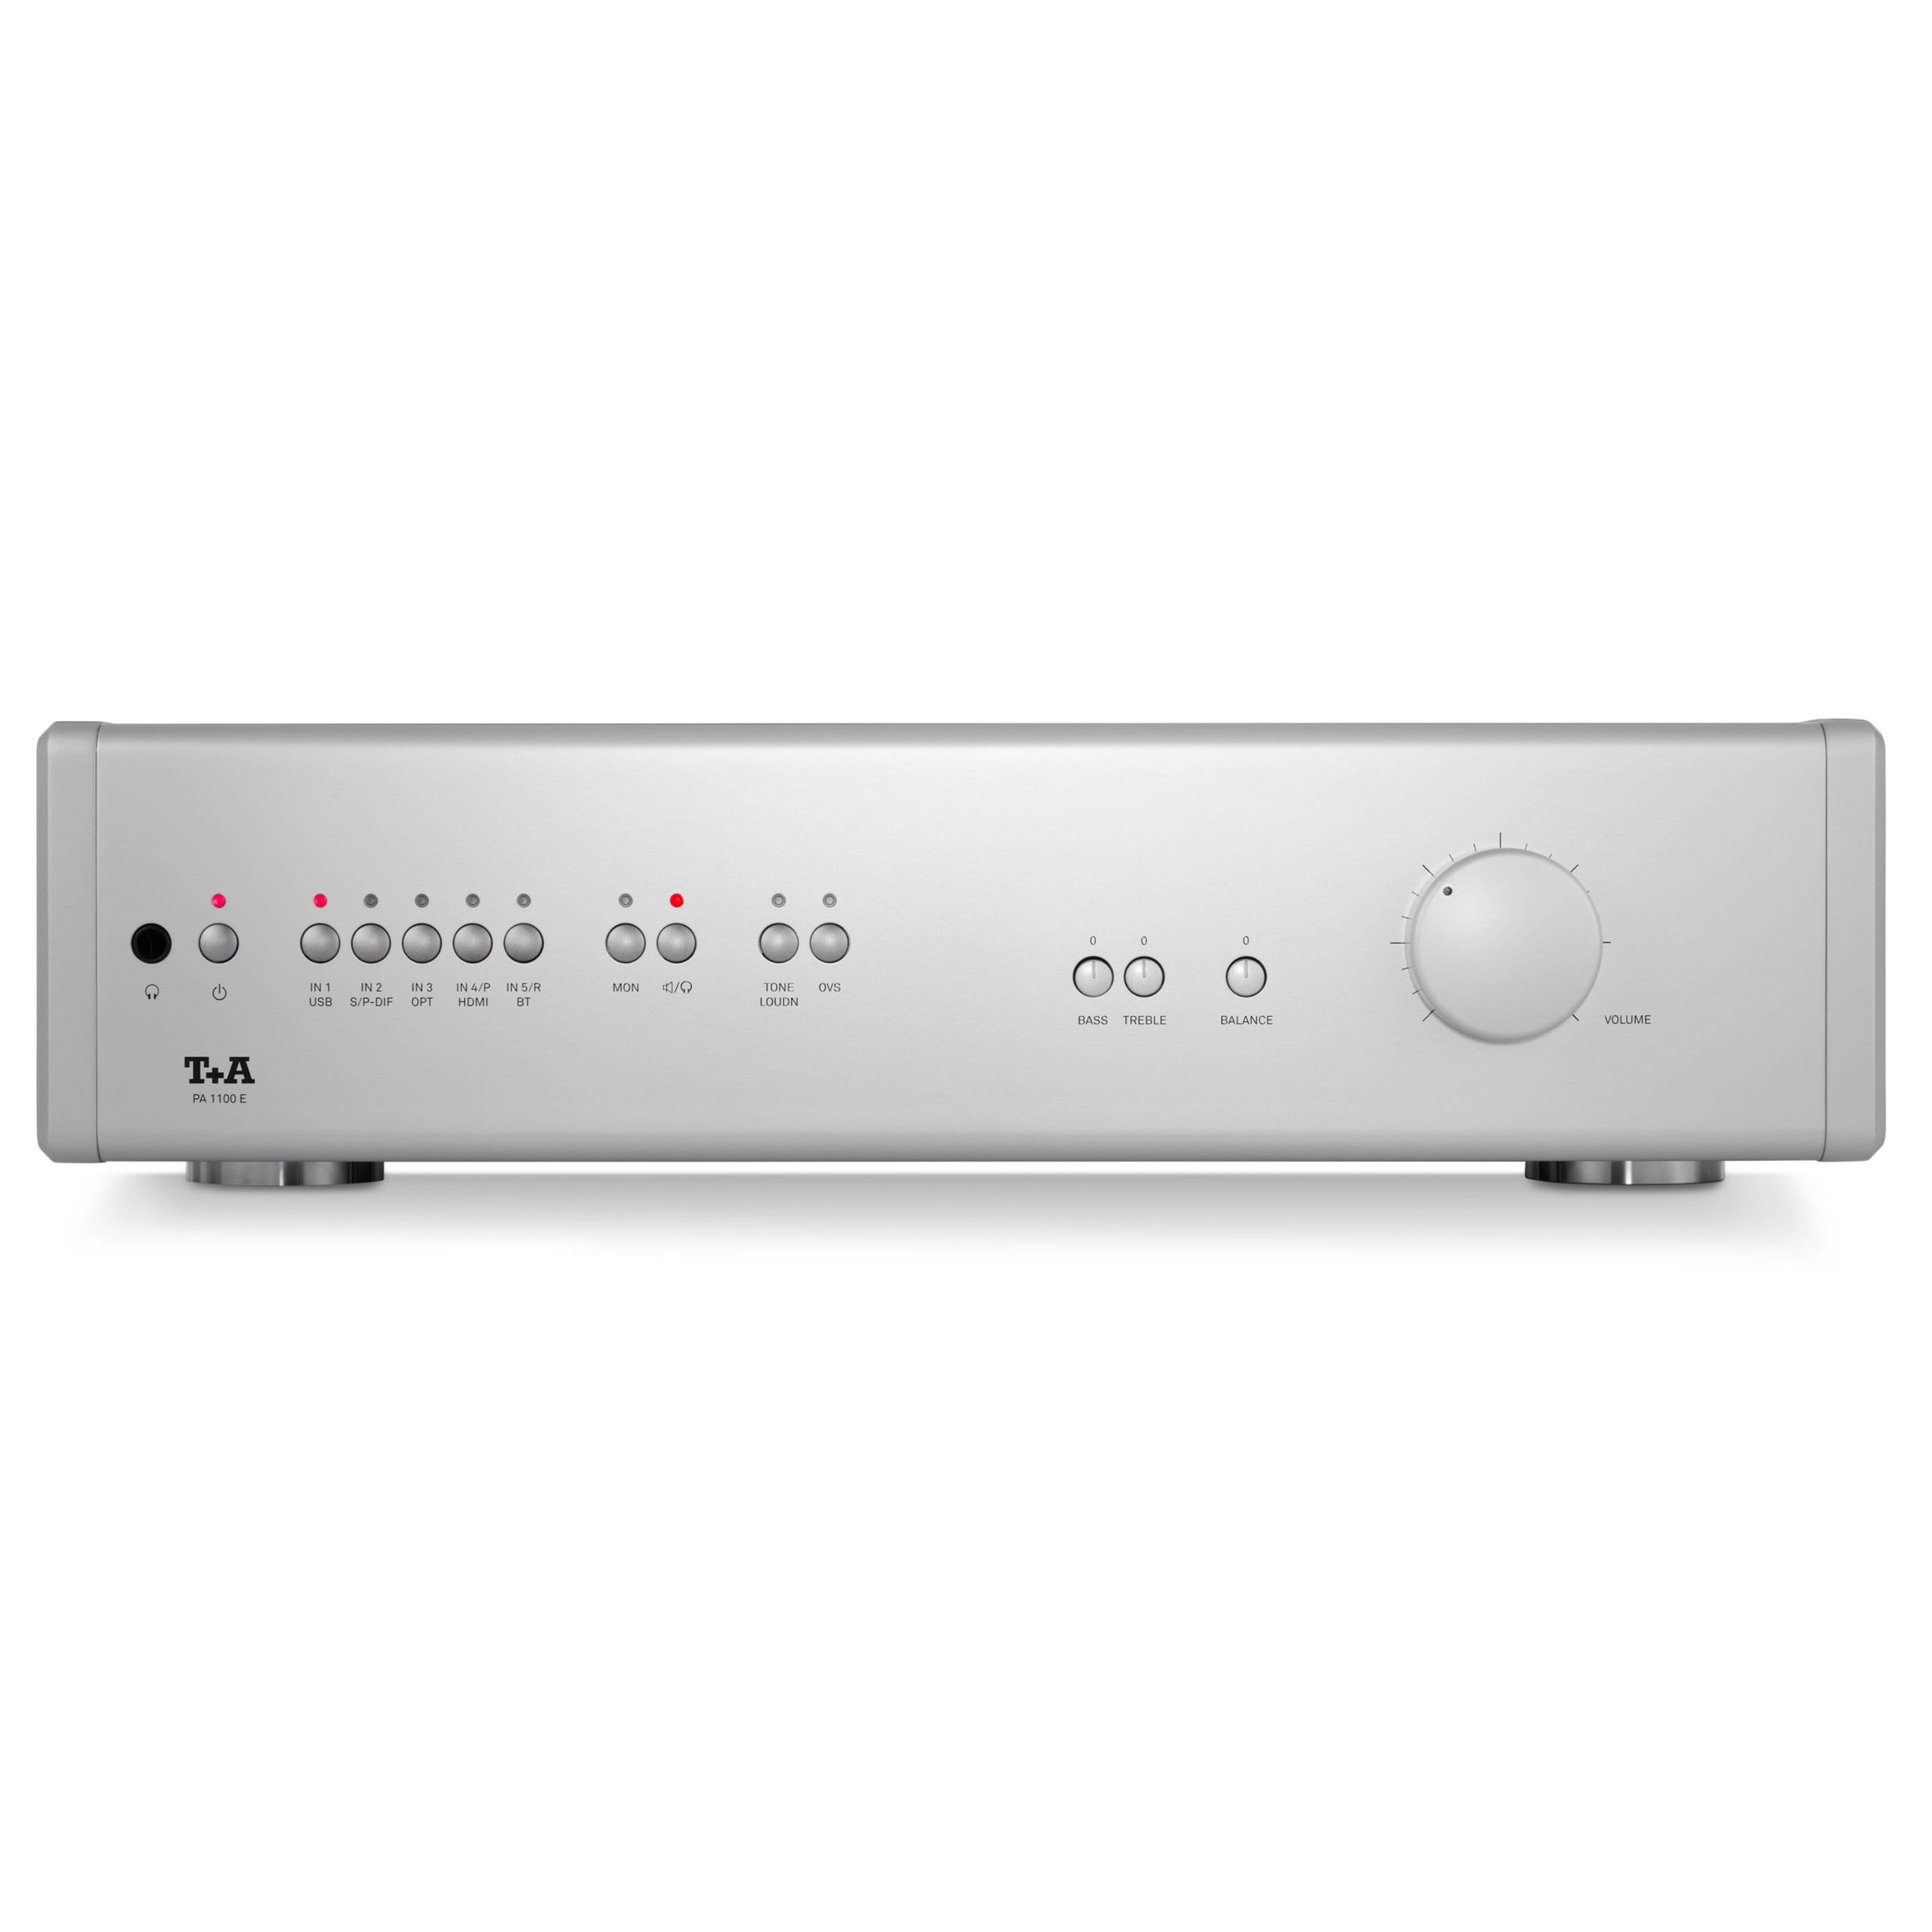 T+A Hi-Fi PA 1100 E Integrated Amplifier with DAC